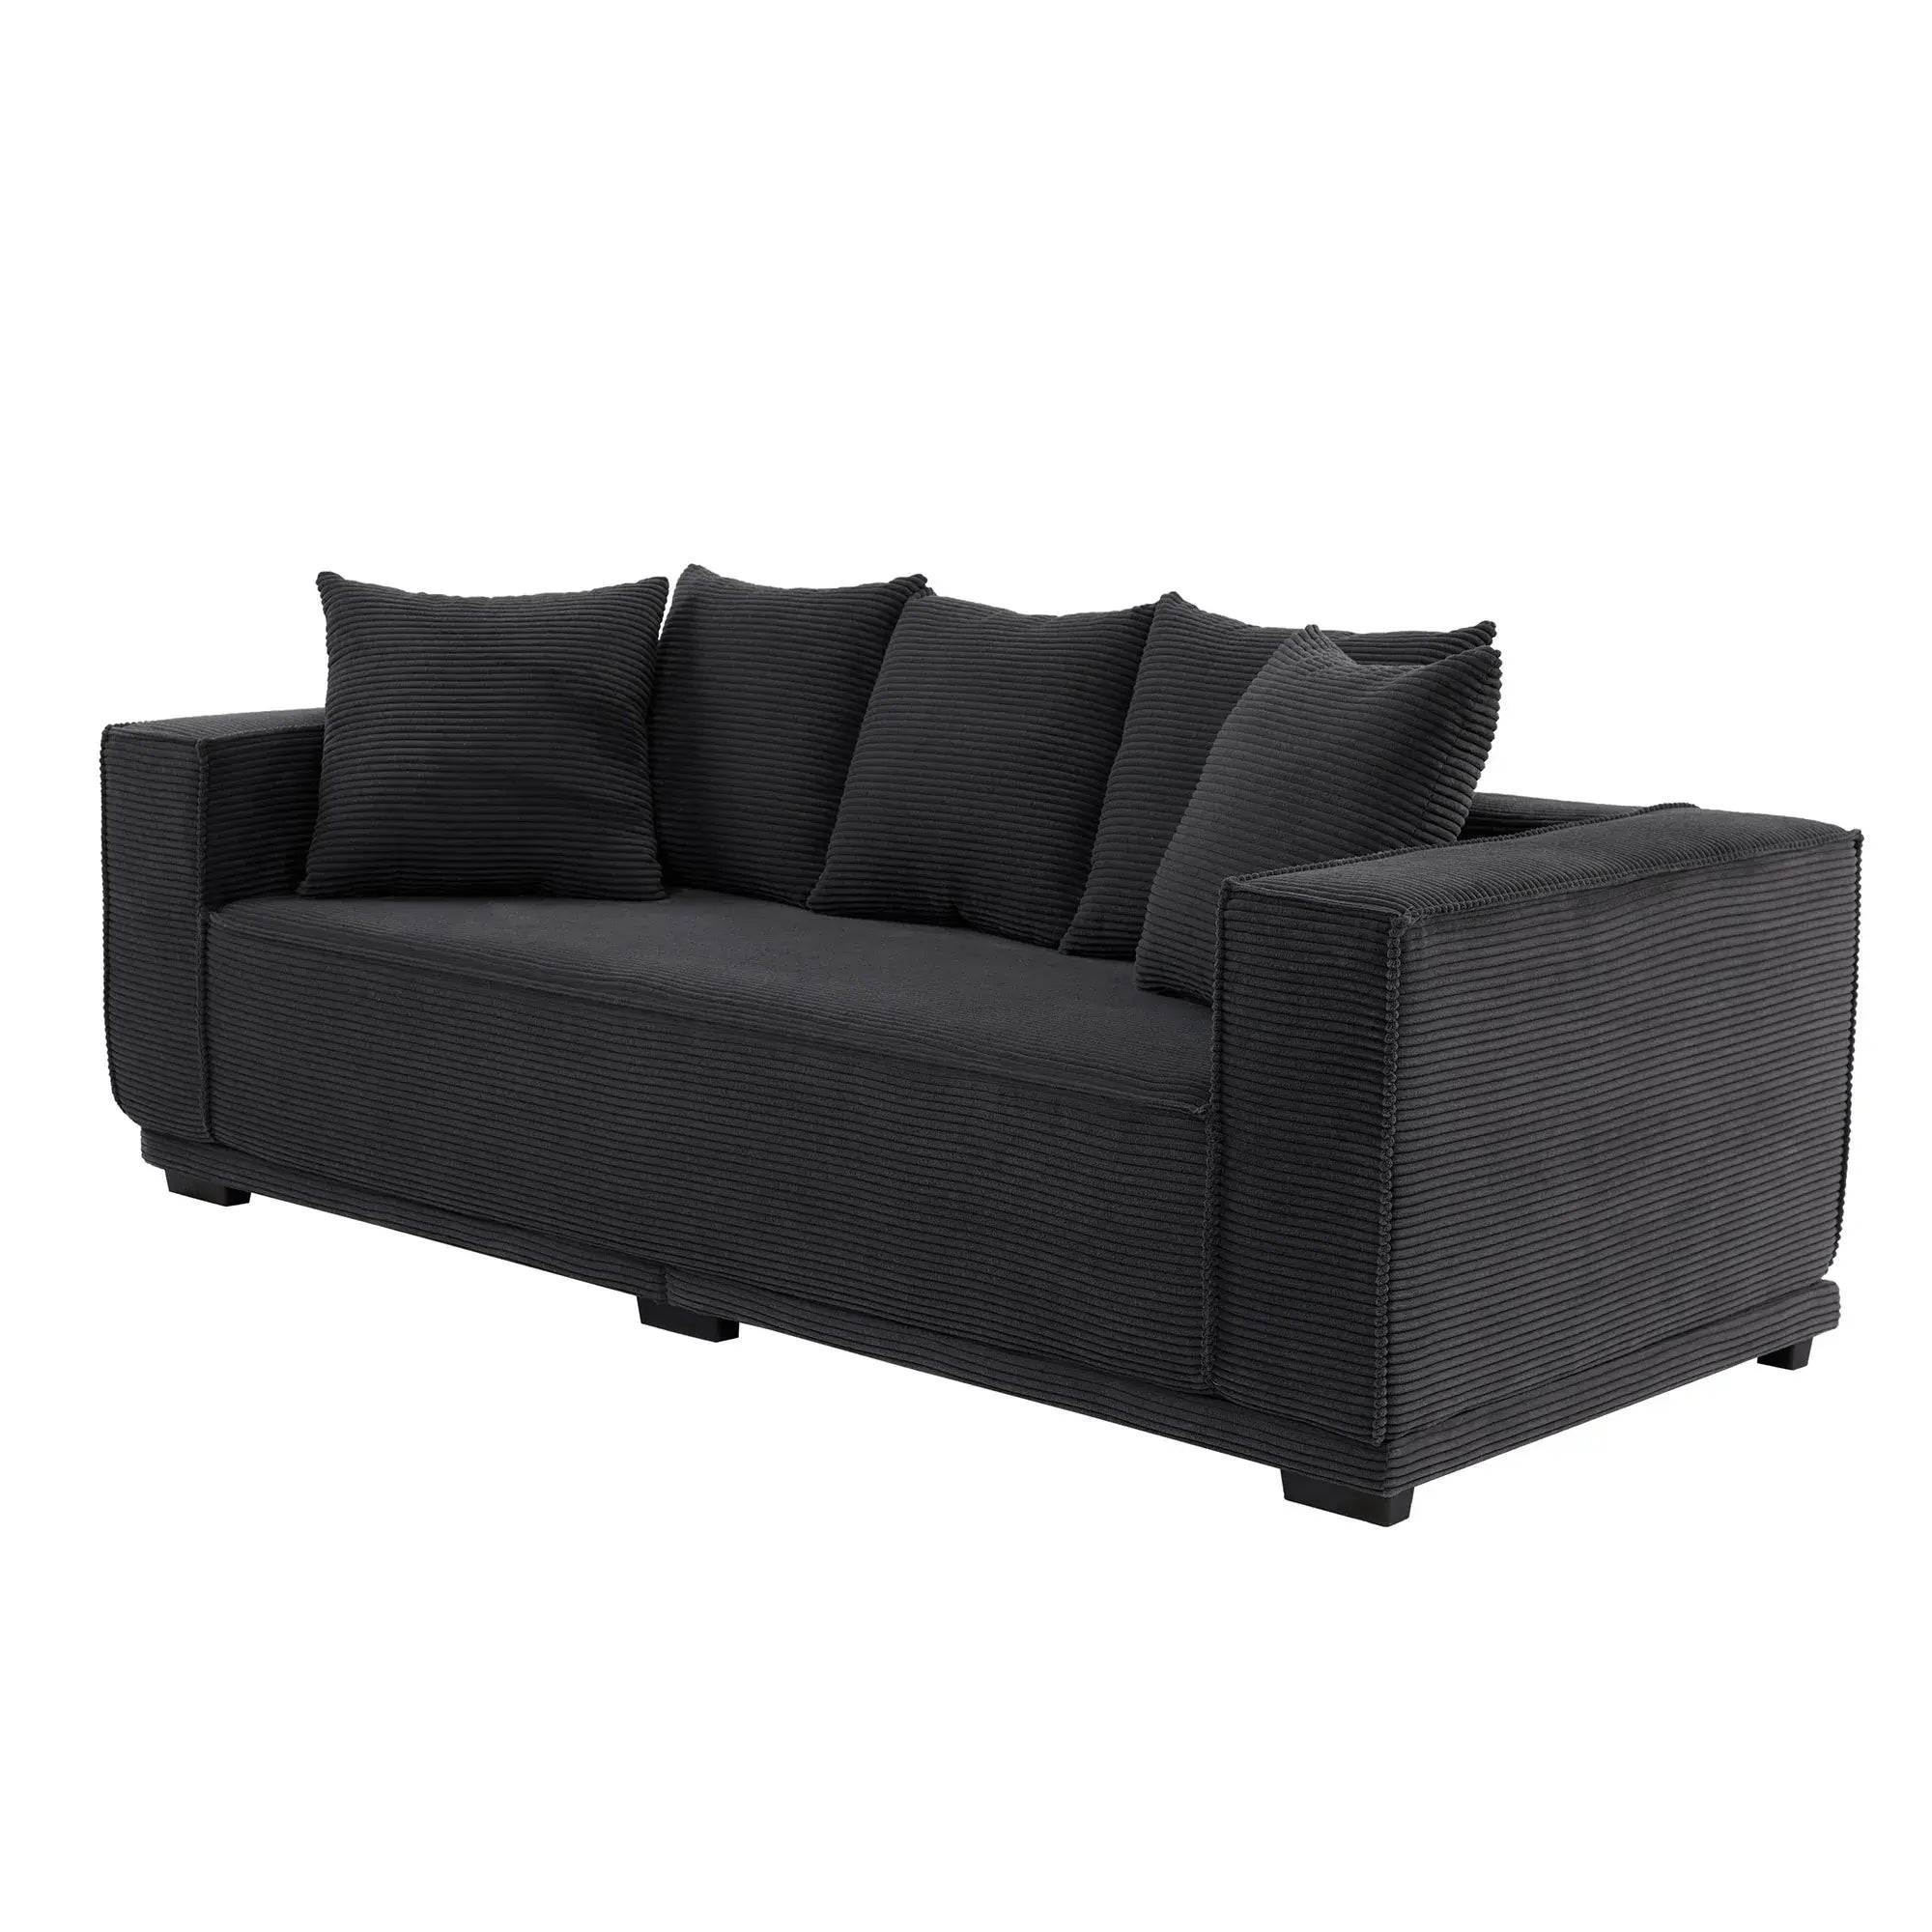 Louie Modern Corduroy Sofa, 3-Seater Couch for Living Room, Bedroom, Apartment in Black